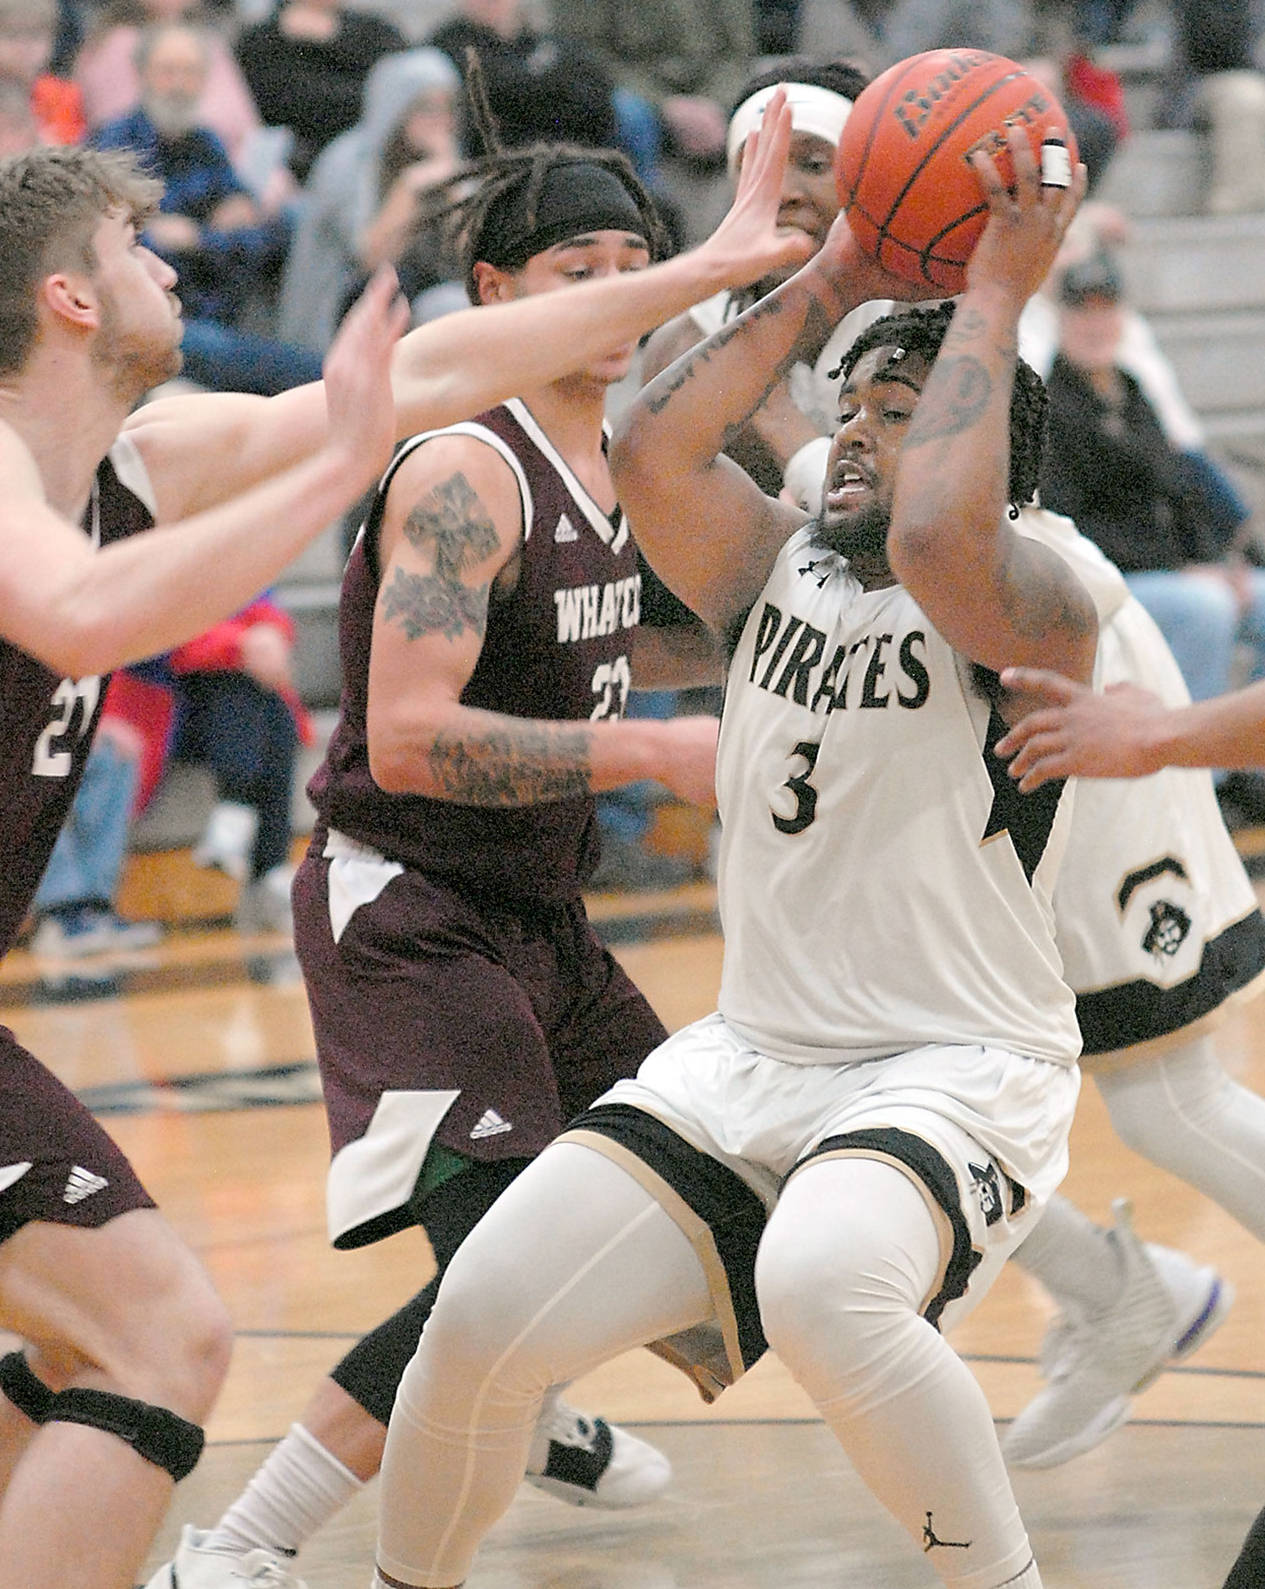 Peninsula’s Davien Harris-Williams, right, is surrounded in the lane by Whatcom’s Spencer Martin, left, and Marcus Montag in Wednesday night’s NWAC North Region game in Port Angeles. (Keith Thorpe/Peninsula Daily News)